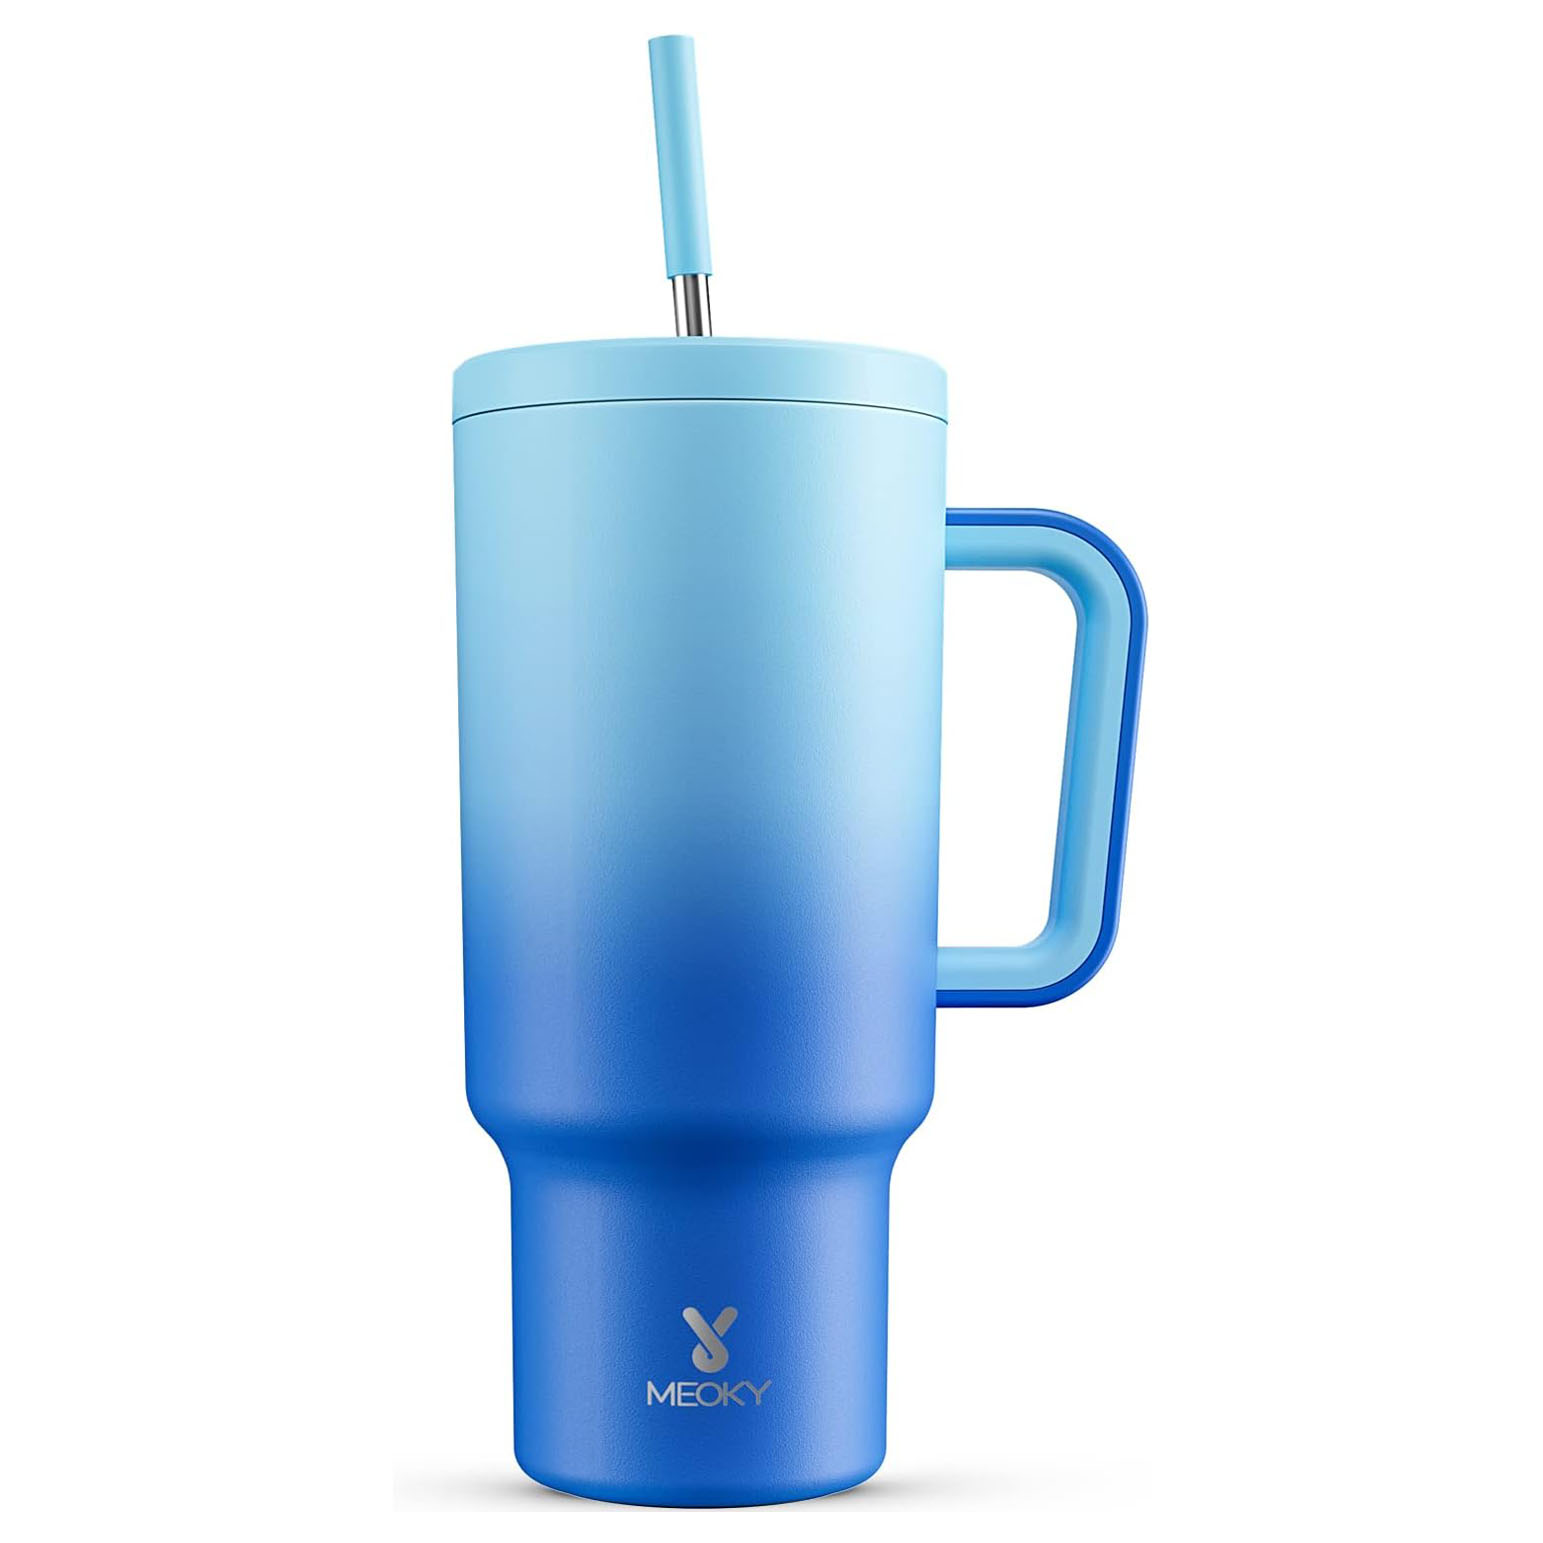 Meoky 40oz Tumbler with Handle with a blue ombre design